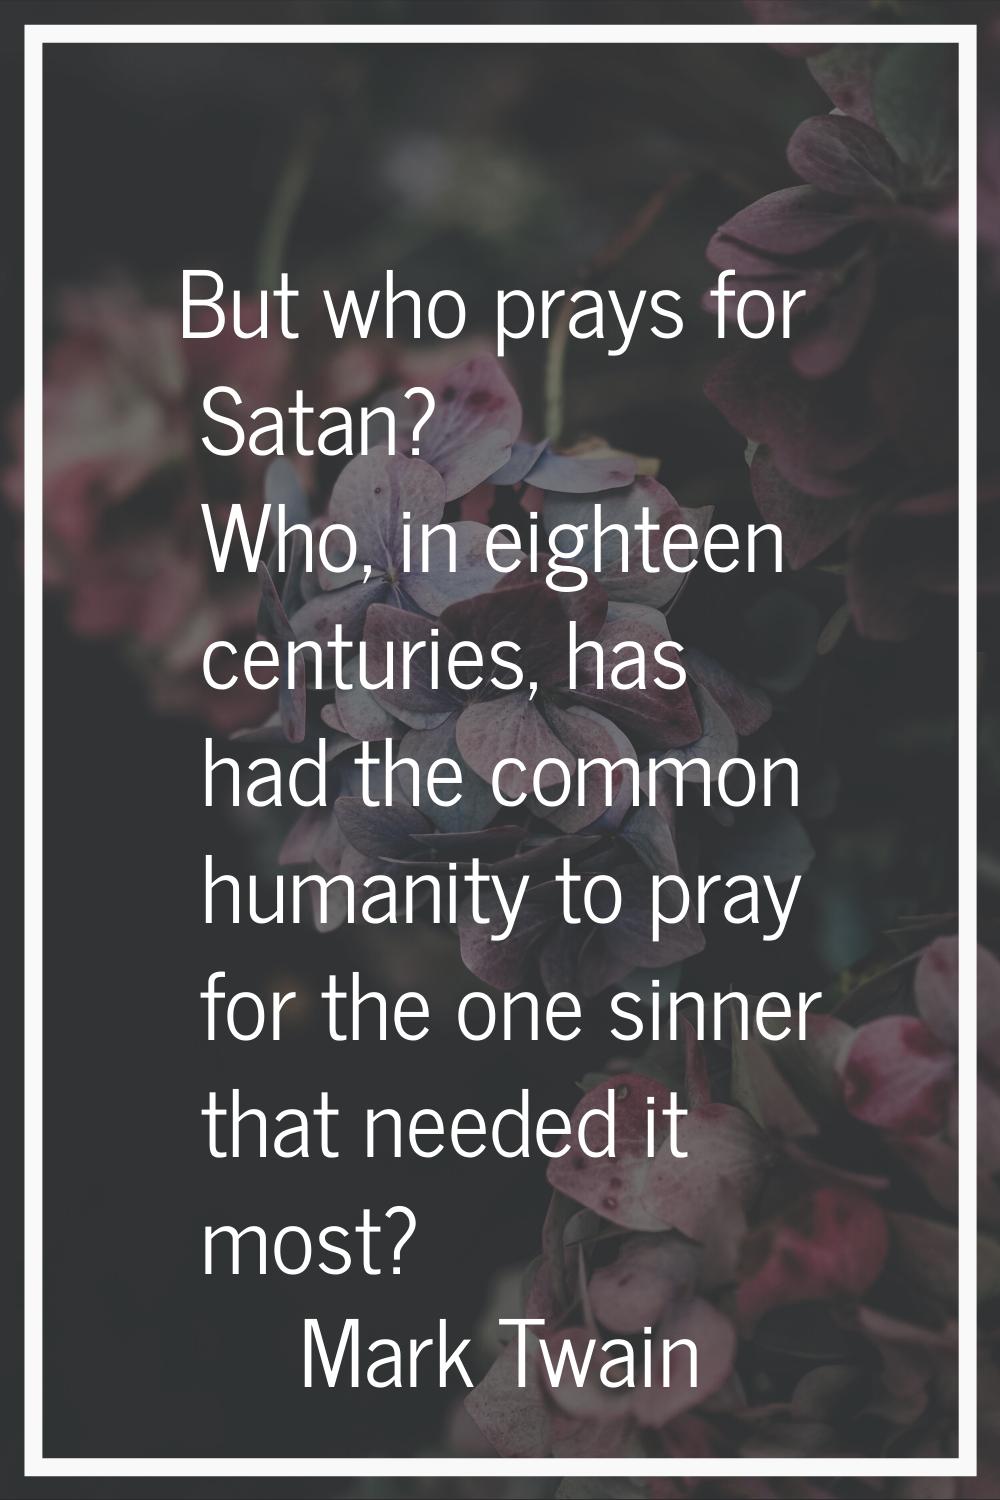 But who prays for Satan? Who, in eighteen centuries, has had the common humanity to pray for the on